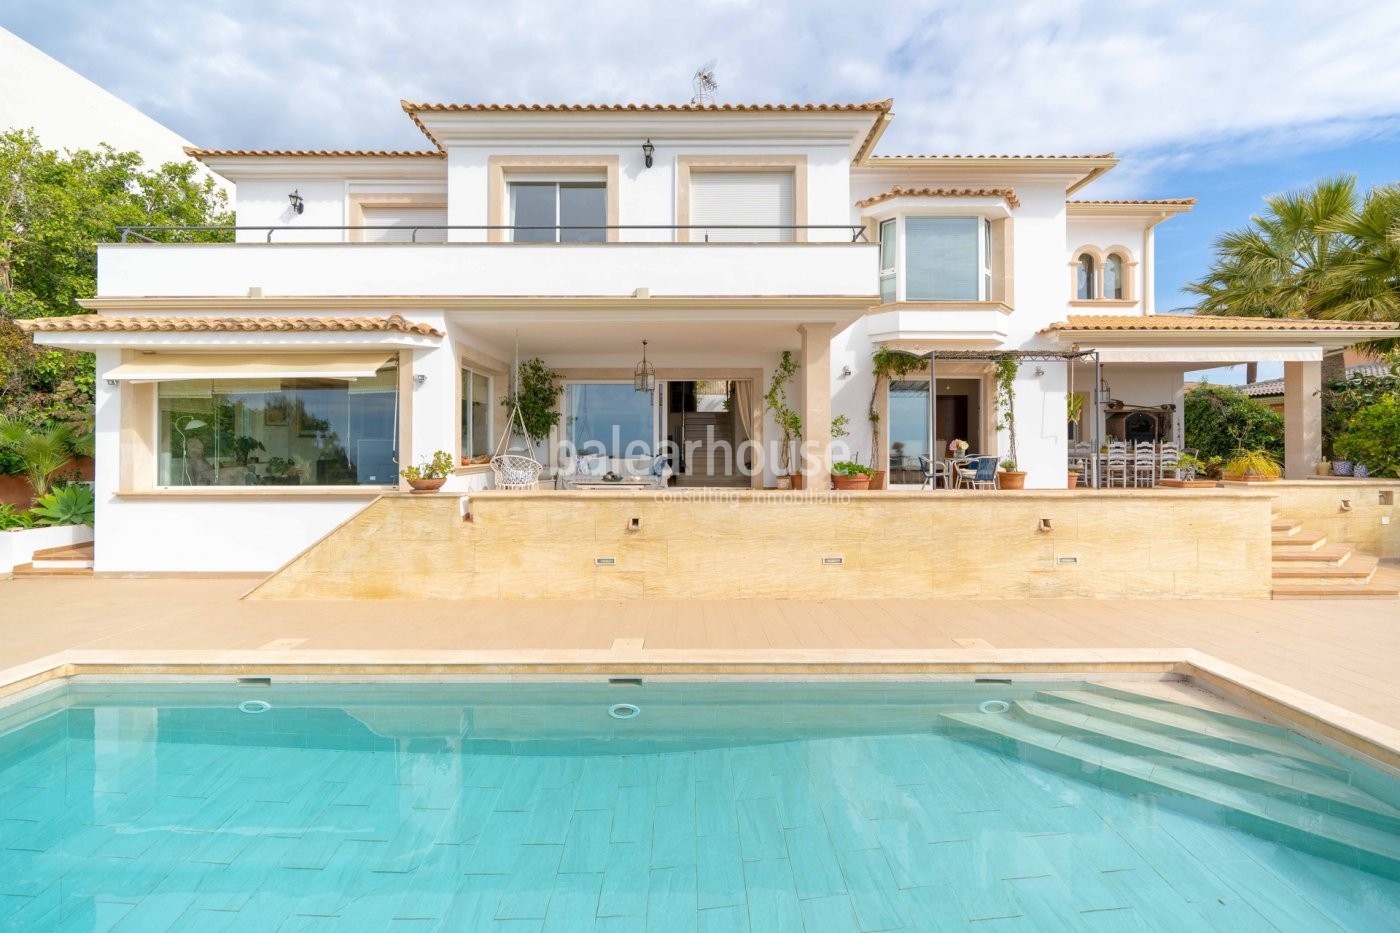 South-facing, elegant and stylish villa with spectacular sea views in  Bendinat.